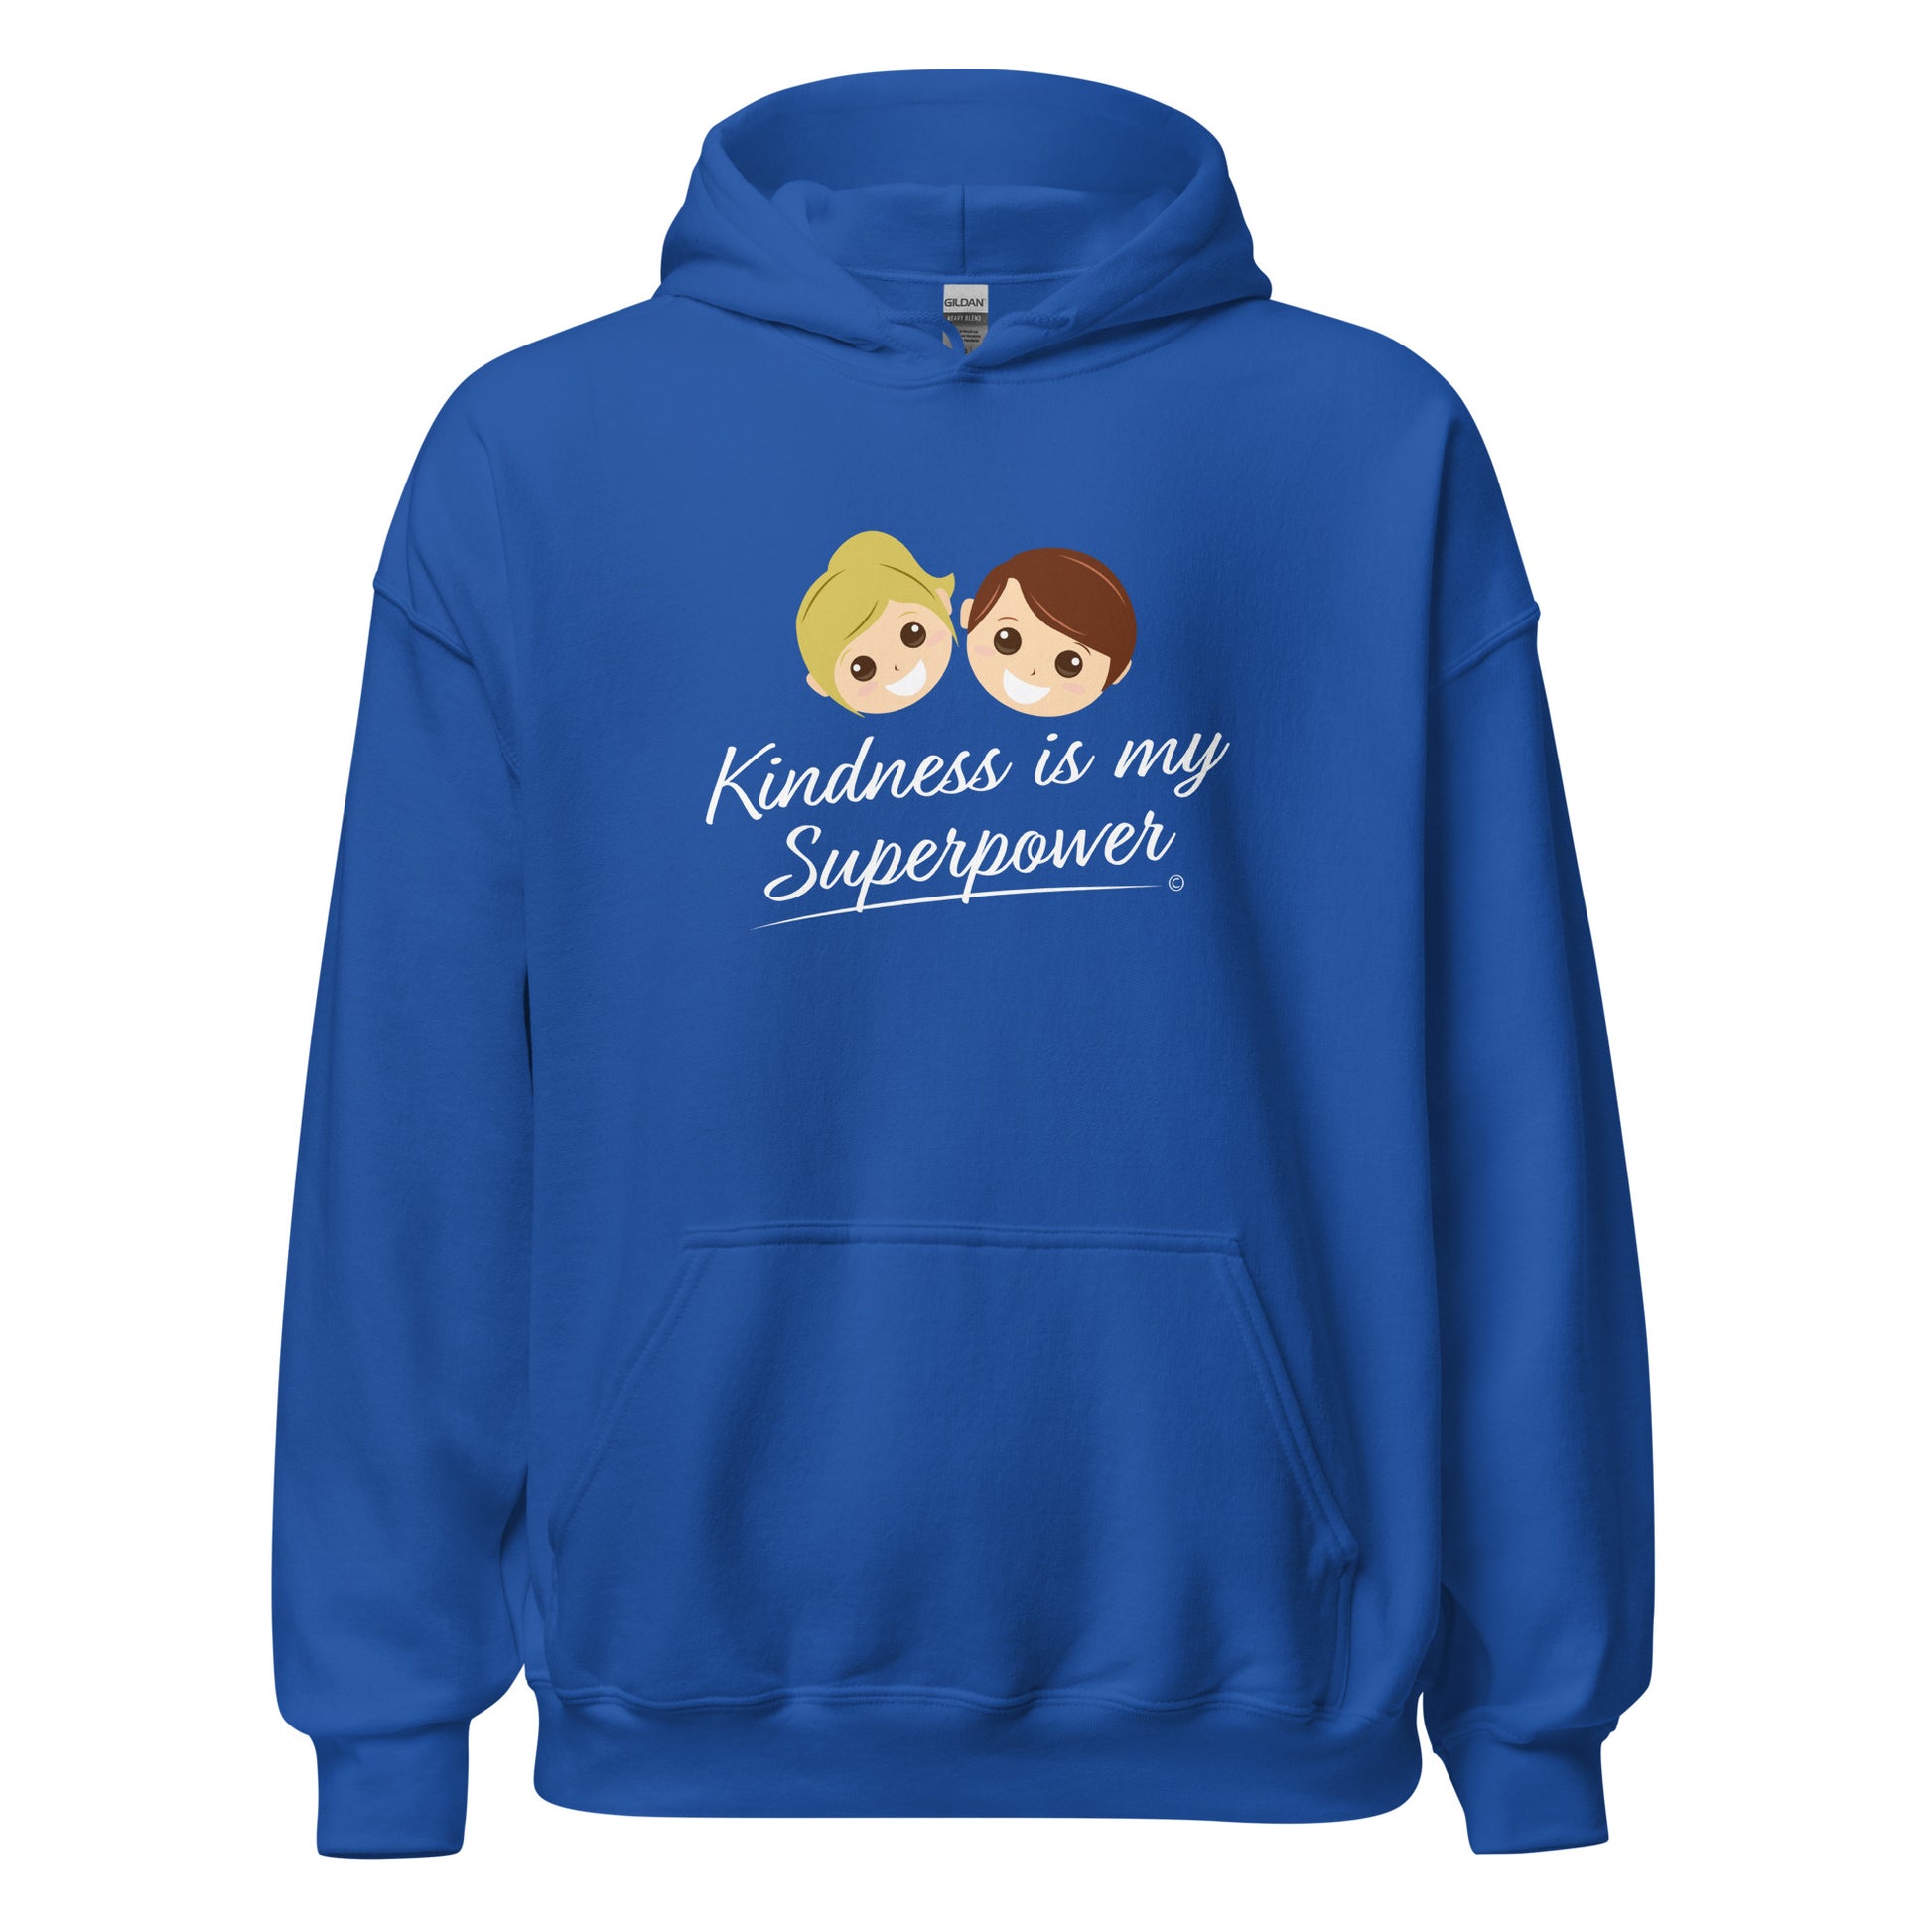 A cozy unisex hoodie in royal blue featuring the uplifting quote 'Kindness is my Superpower' in bold lettering.